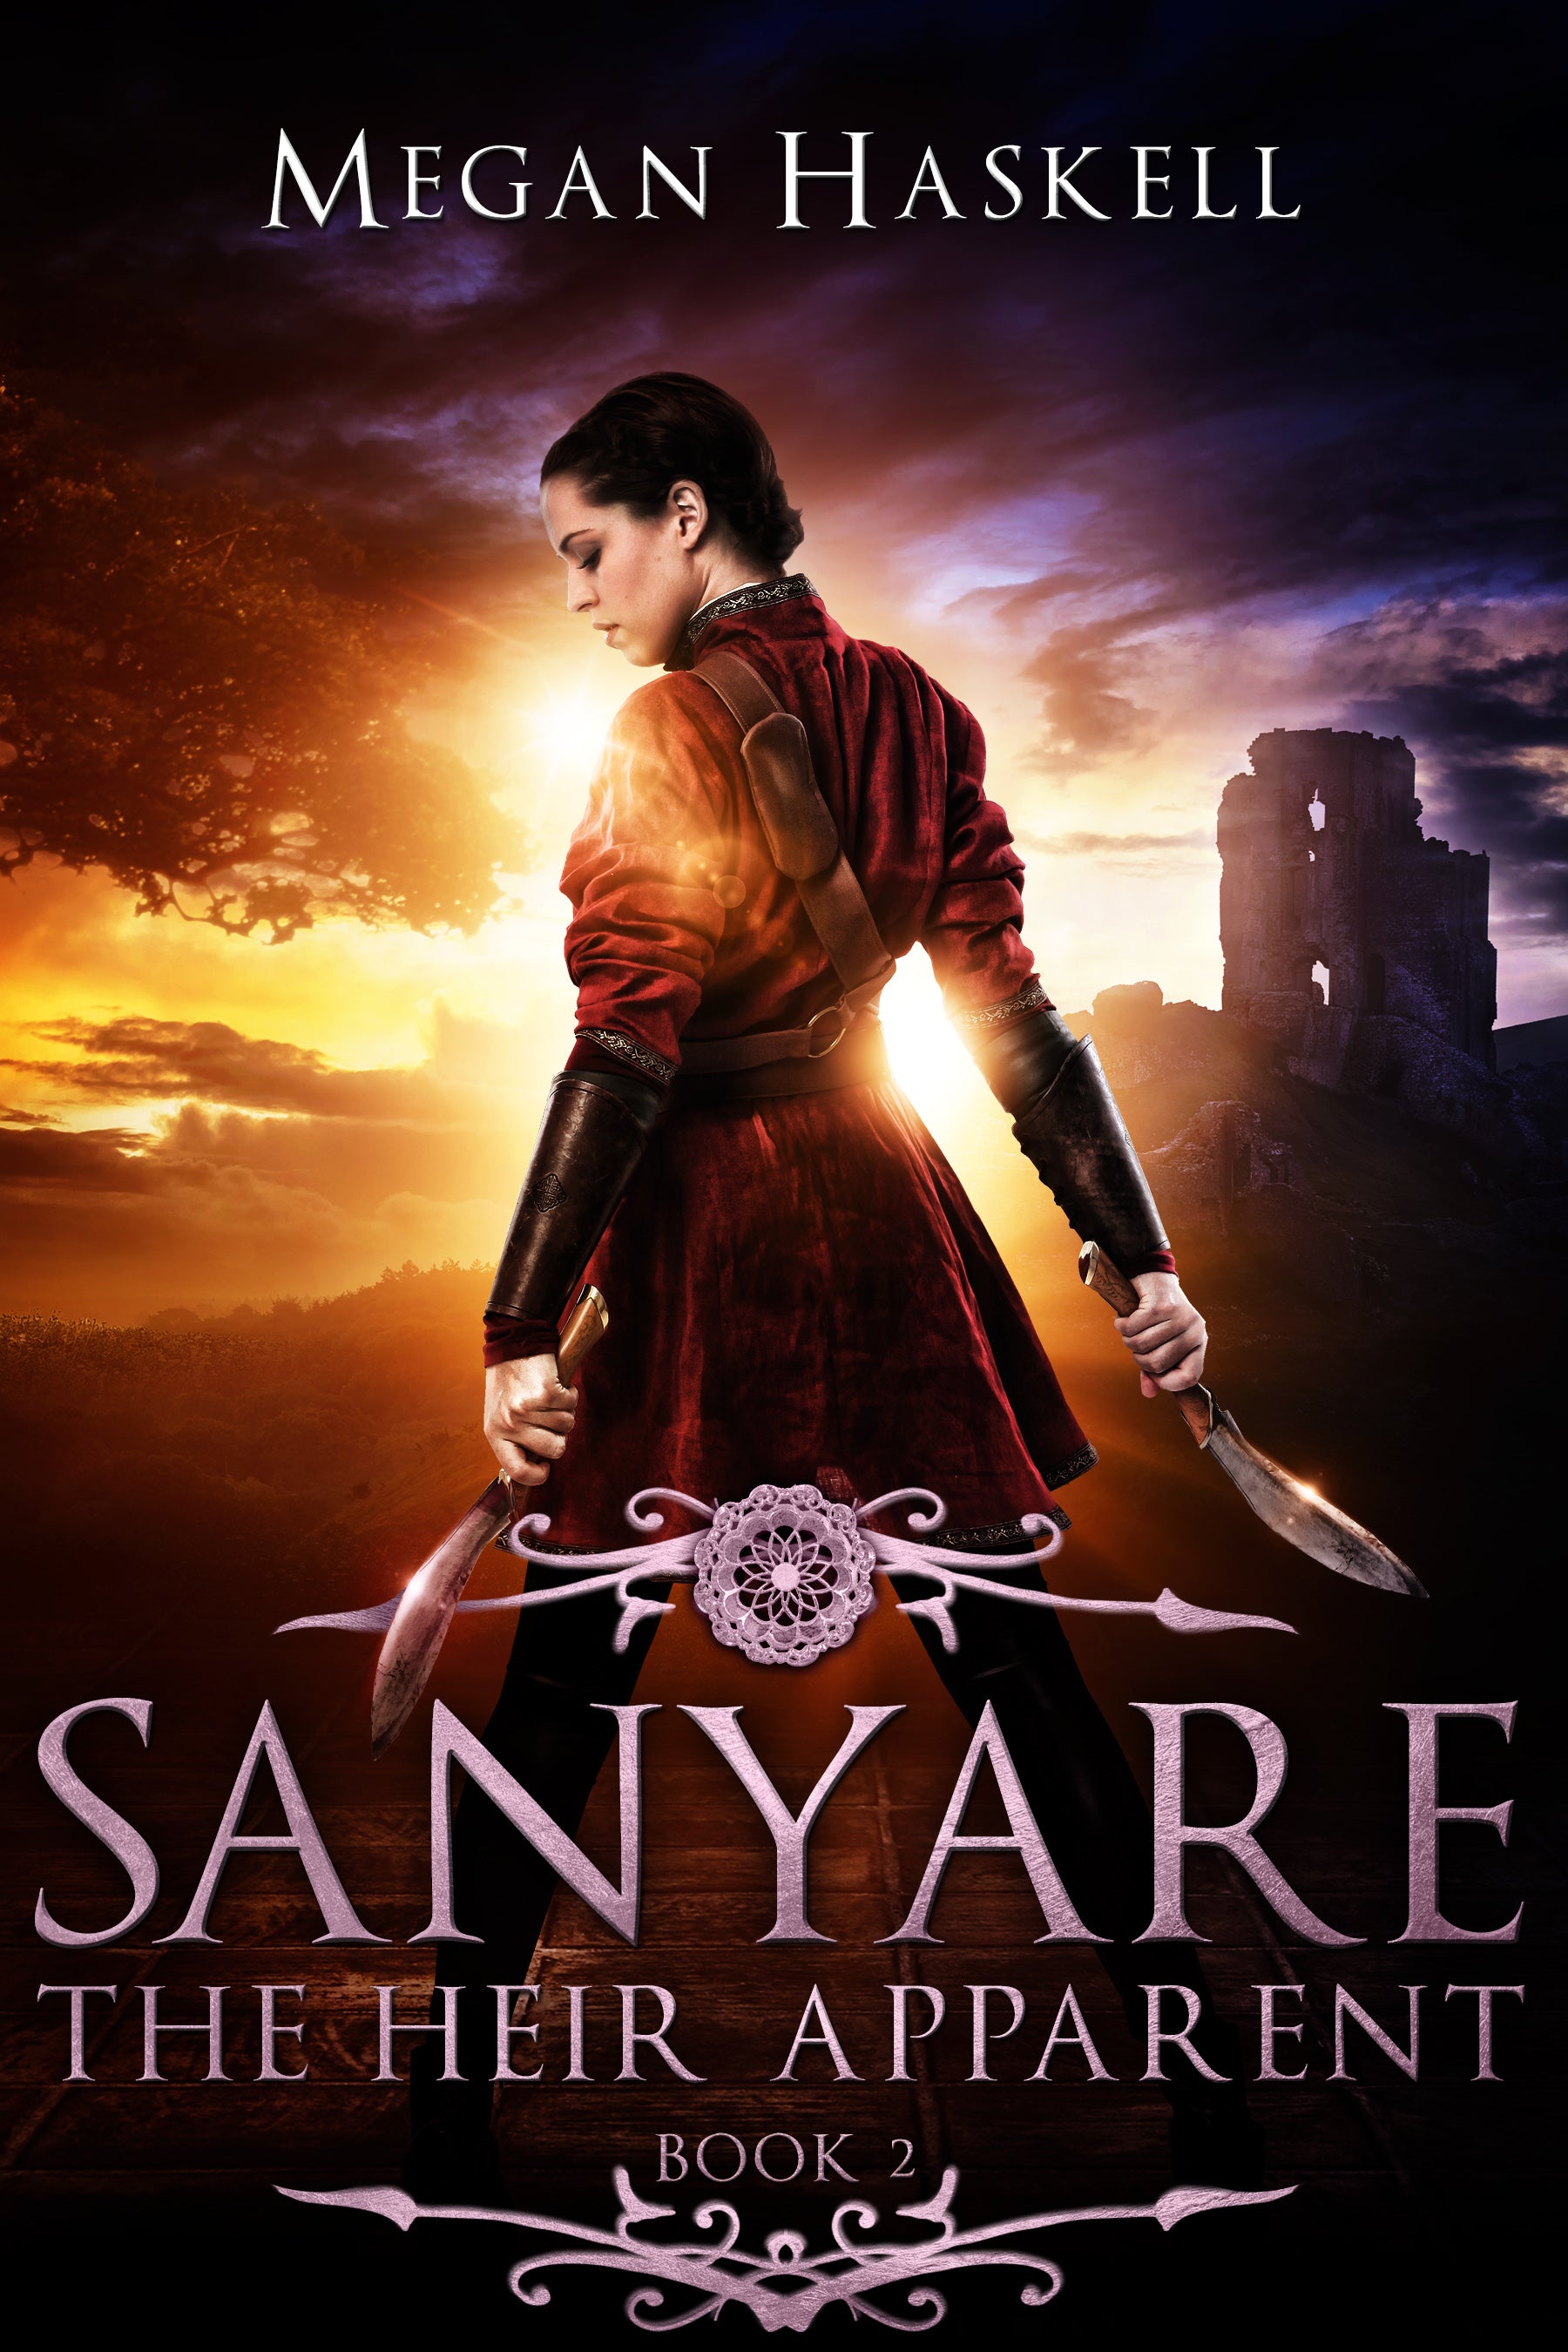 Book Review: Sanyare: The Heir Apparent